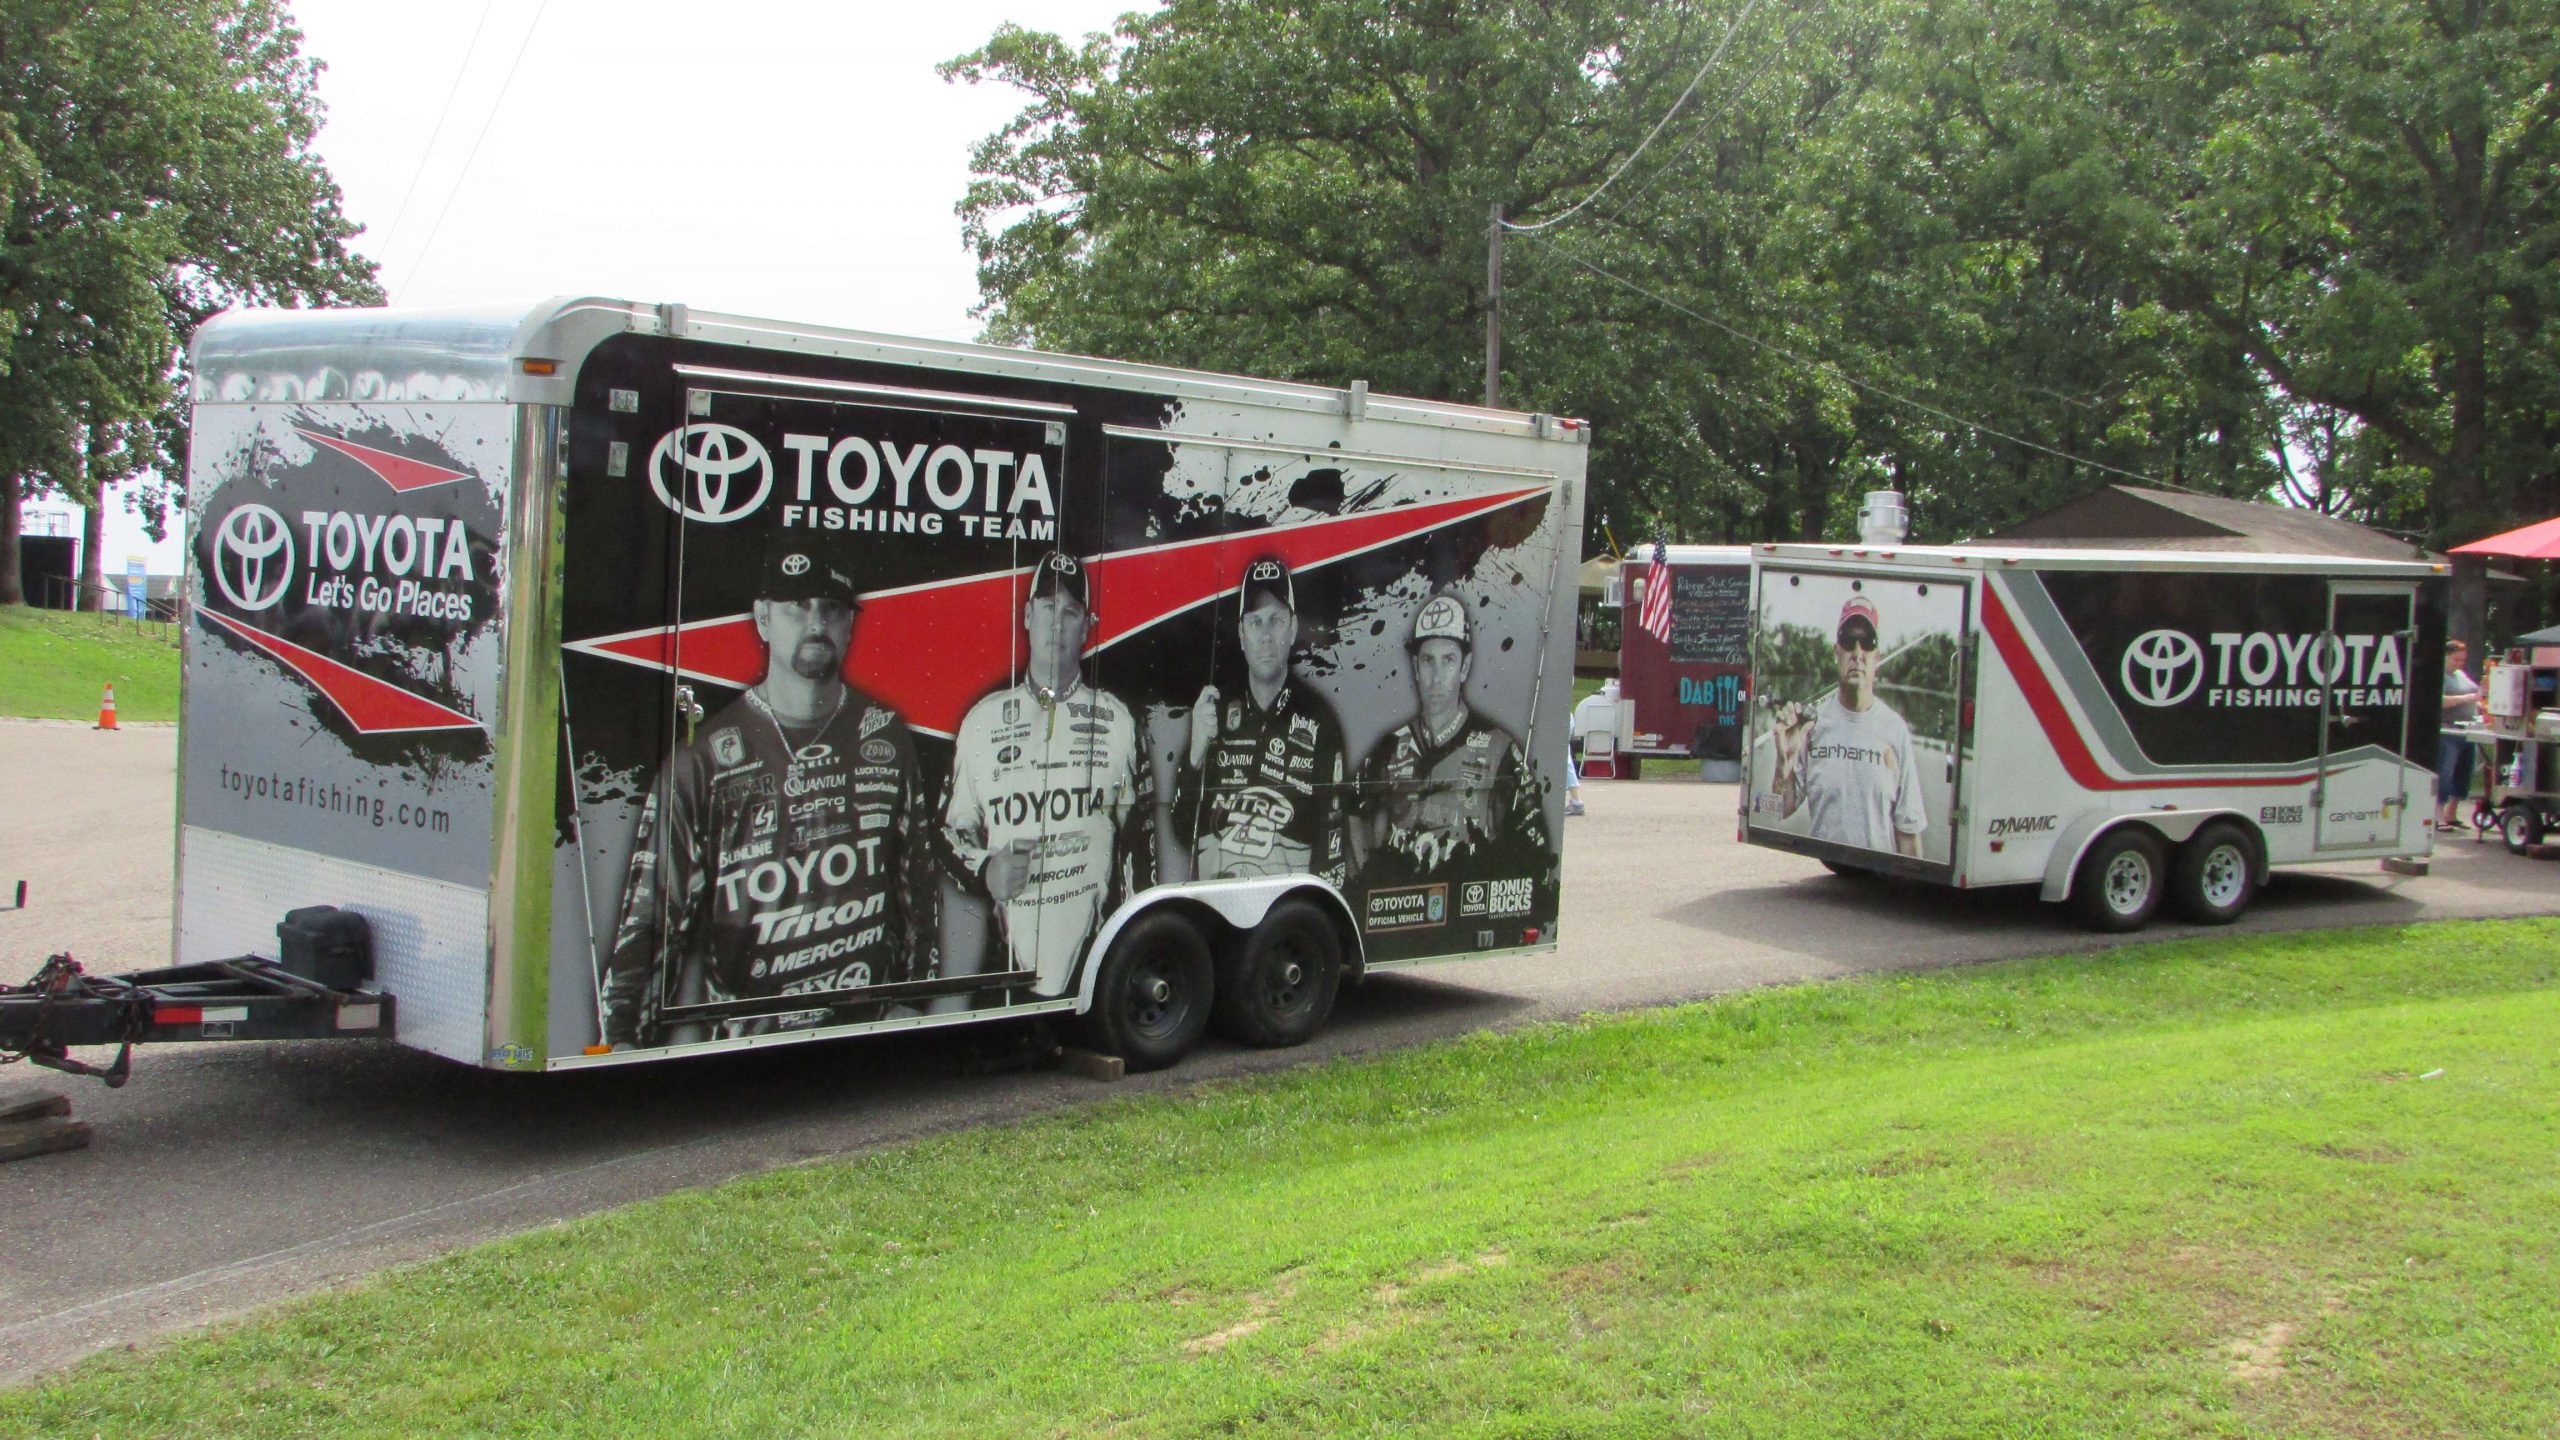 Team Toyota was well represented at the Paris Landing State Park BASSfest site.